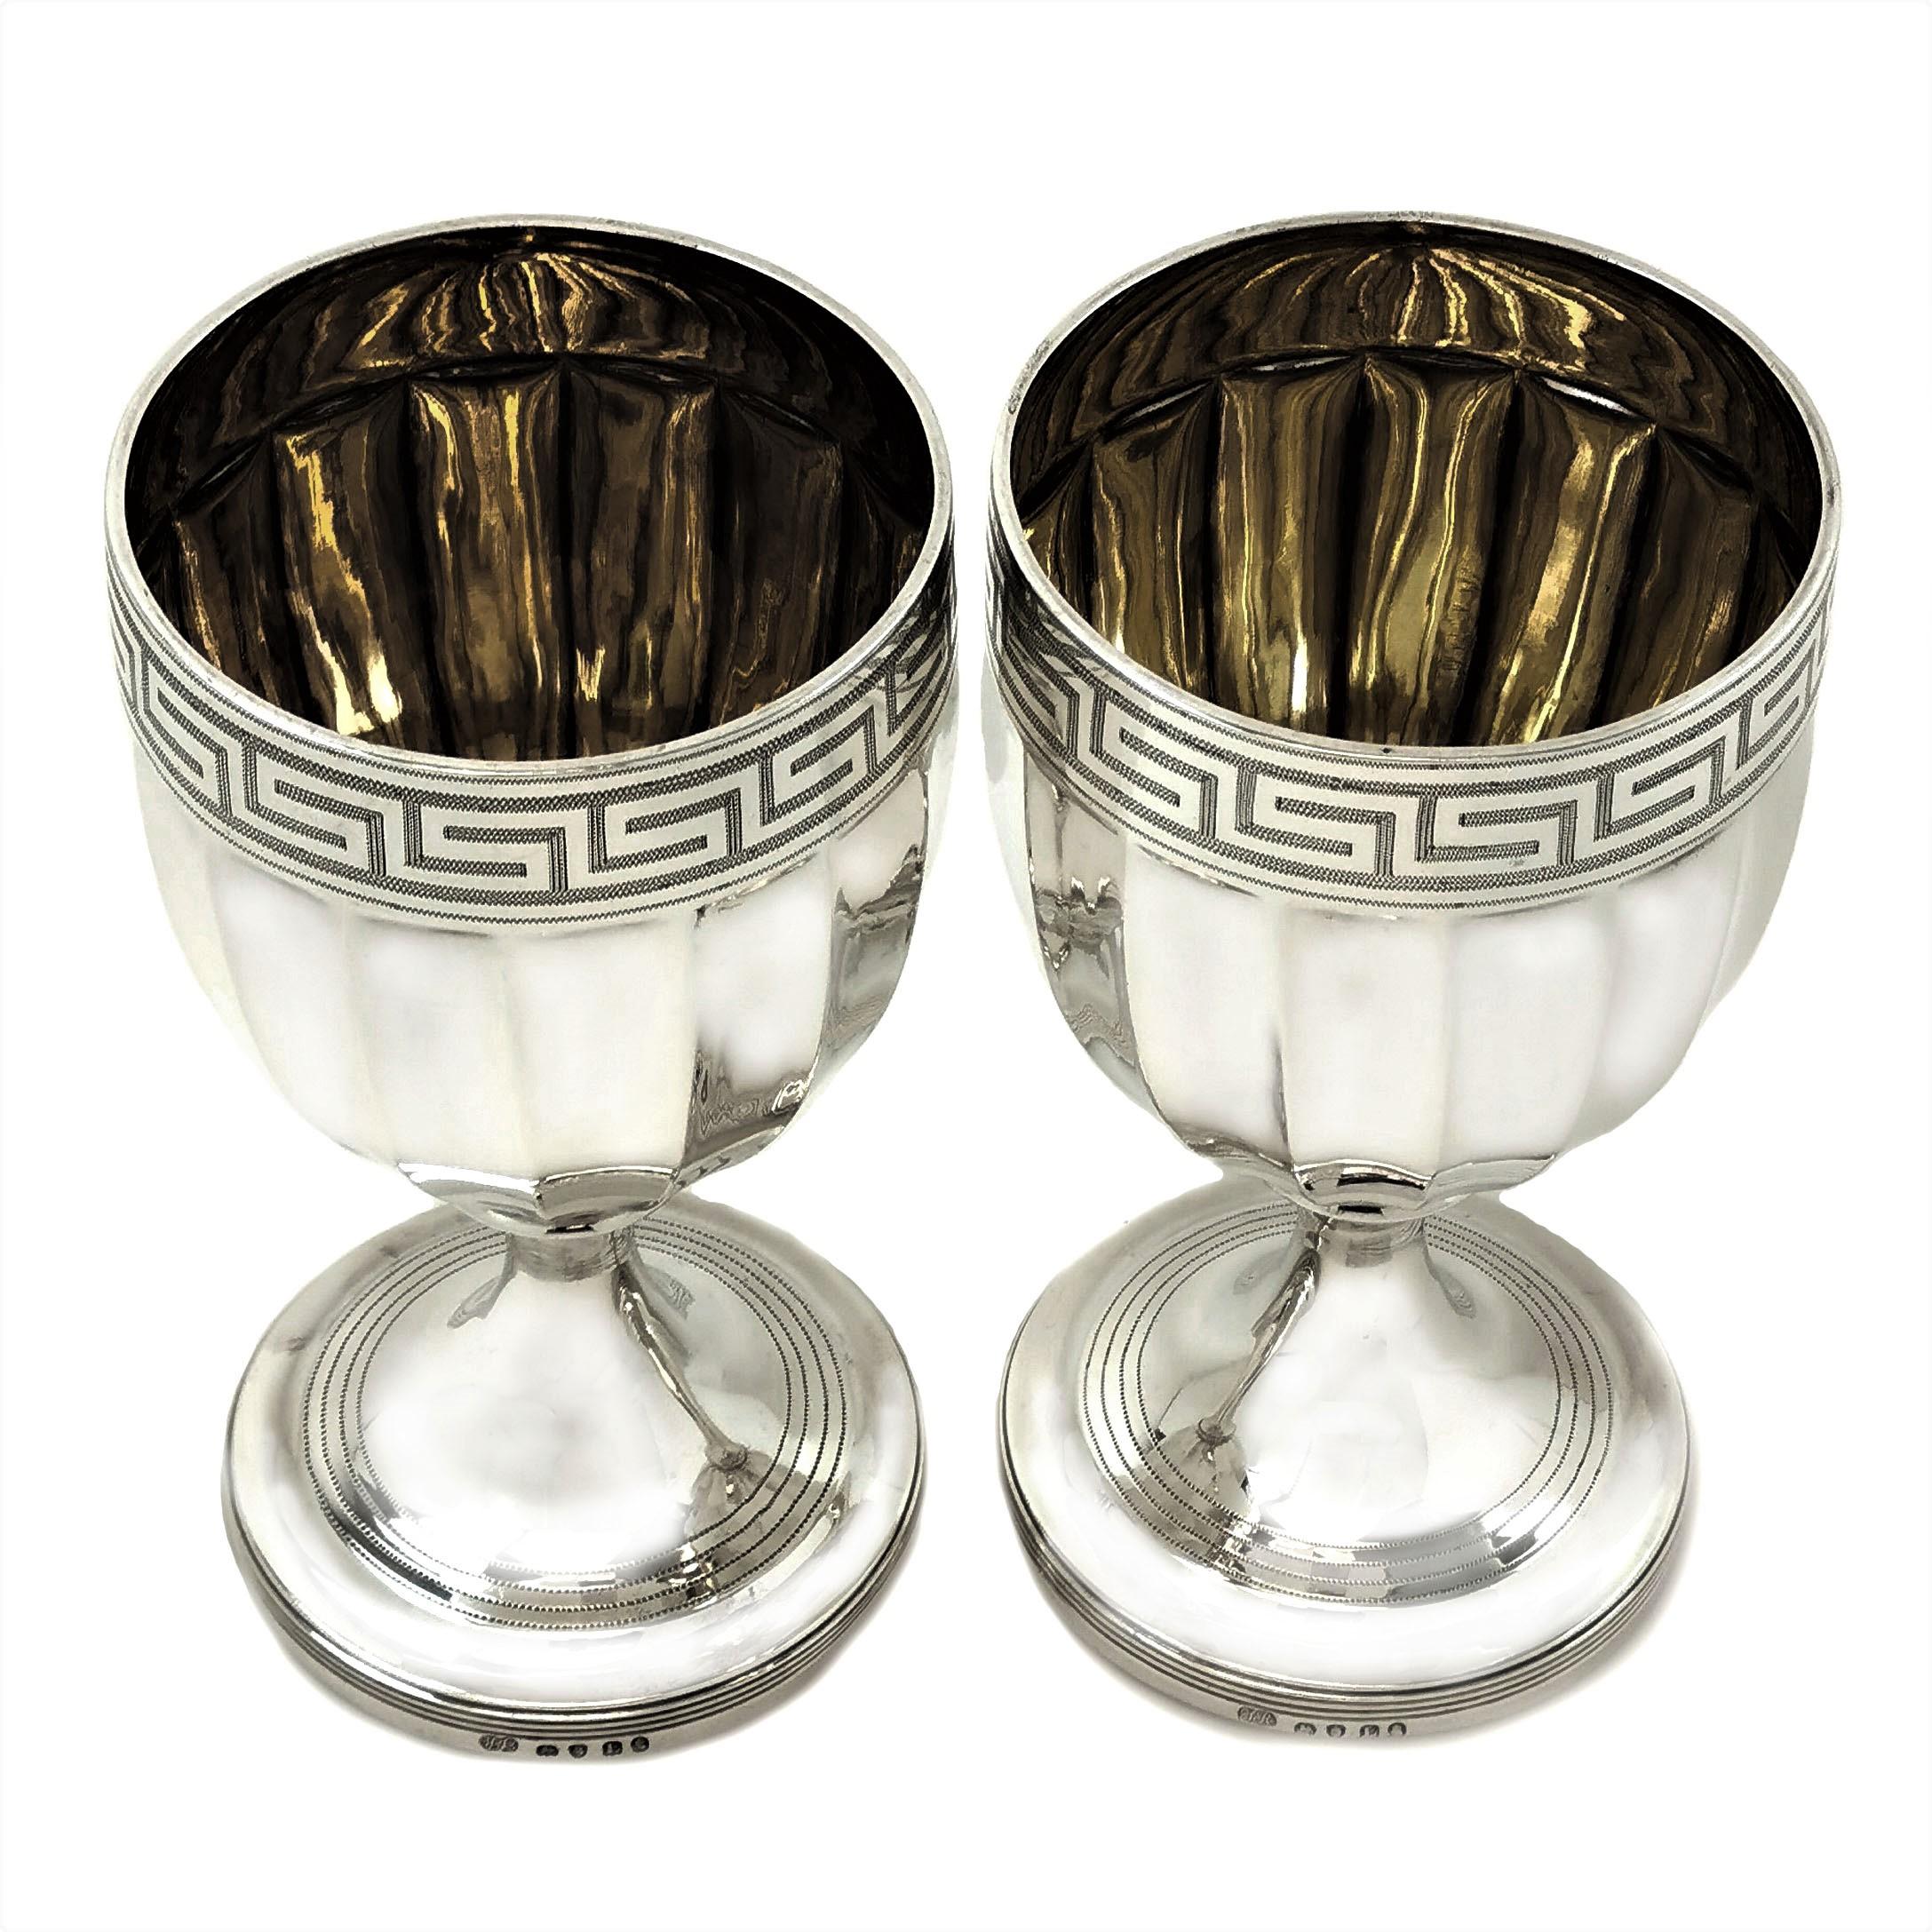 A pair of elegant antique Georgian solid silver goblets with a classic Greek Key pattern border below the rim and a panelled body. The foot of the goblet has a subtle reeded pattern. These Goblets are of substantial size.

Made in London in 1806